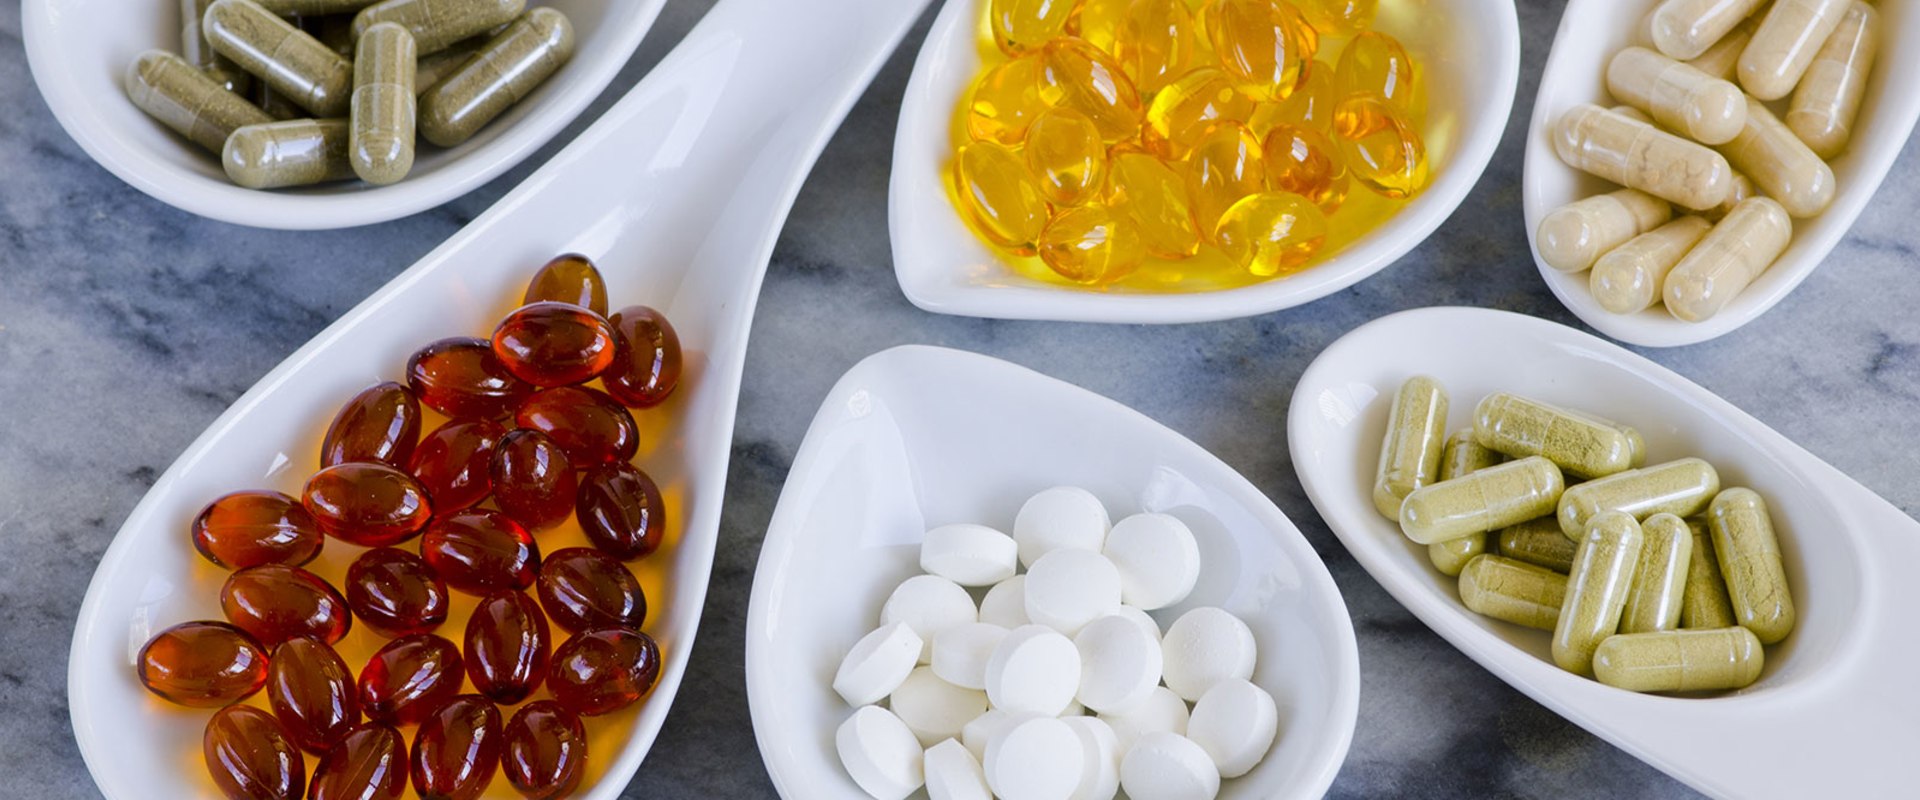 Understanding the Interactions between Vitamins and Supplements and Other Medications